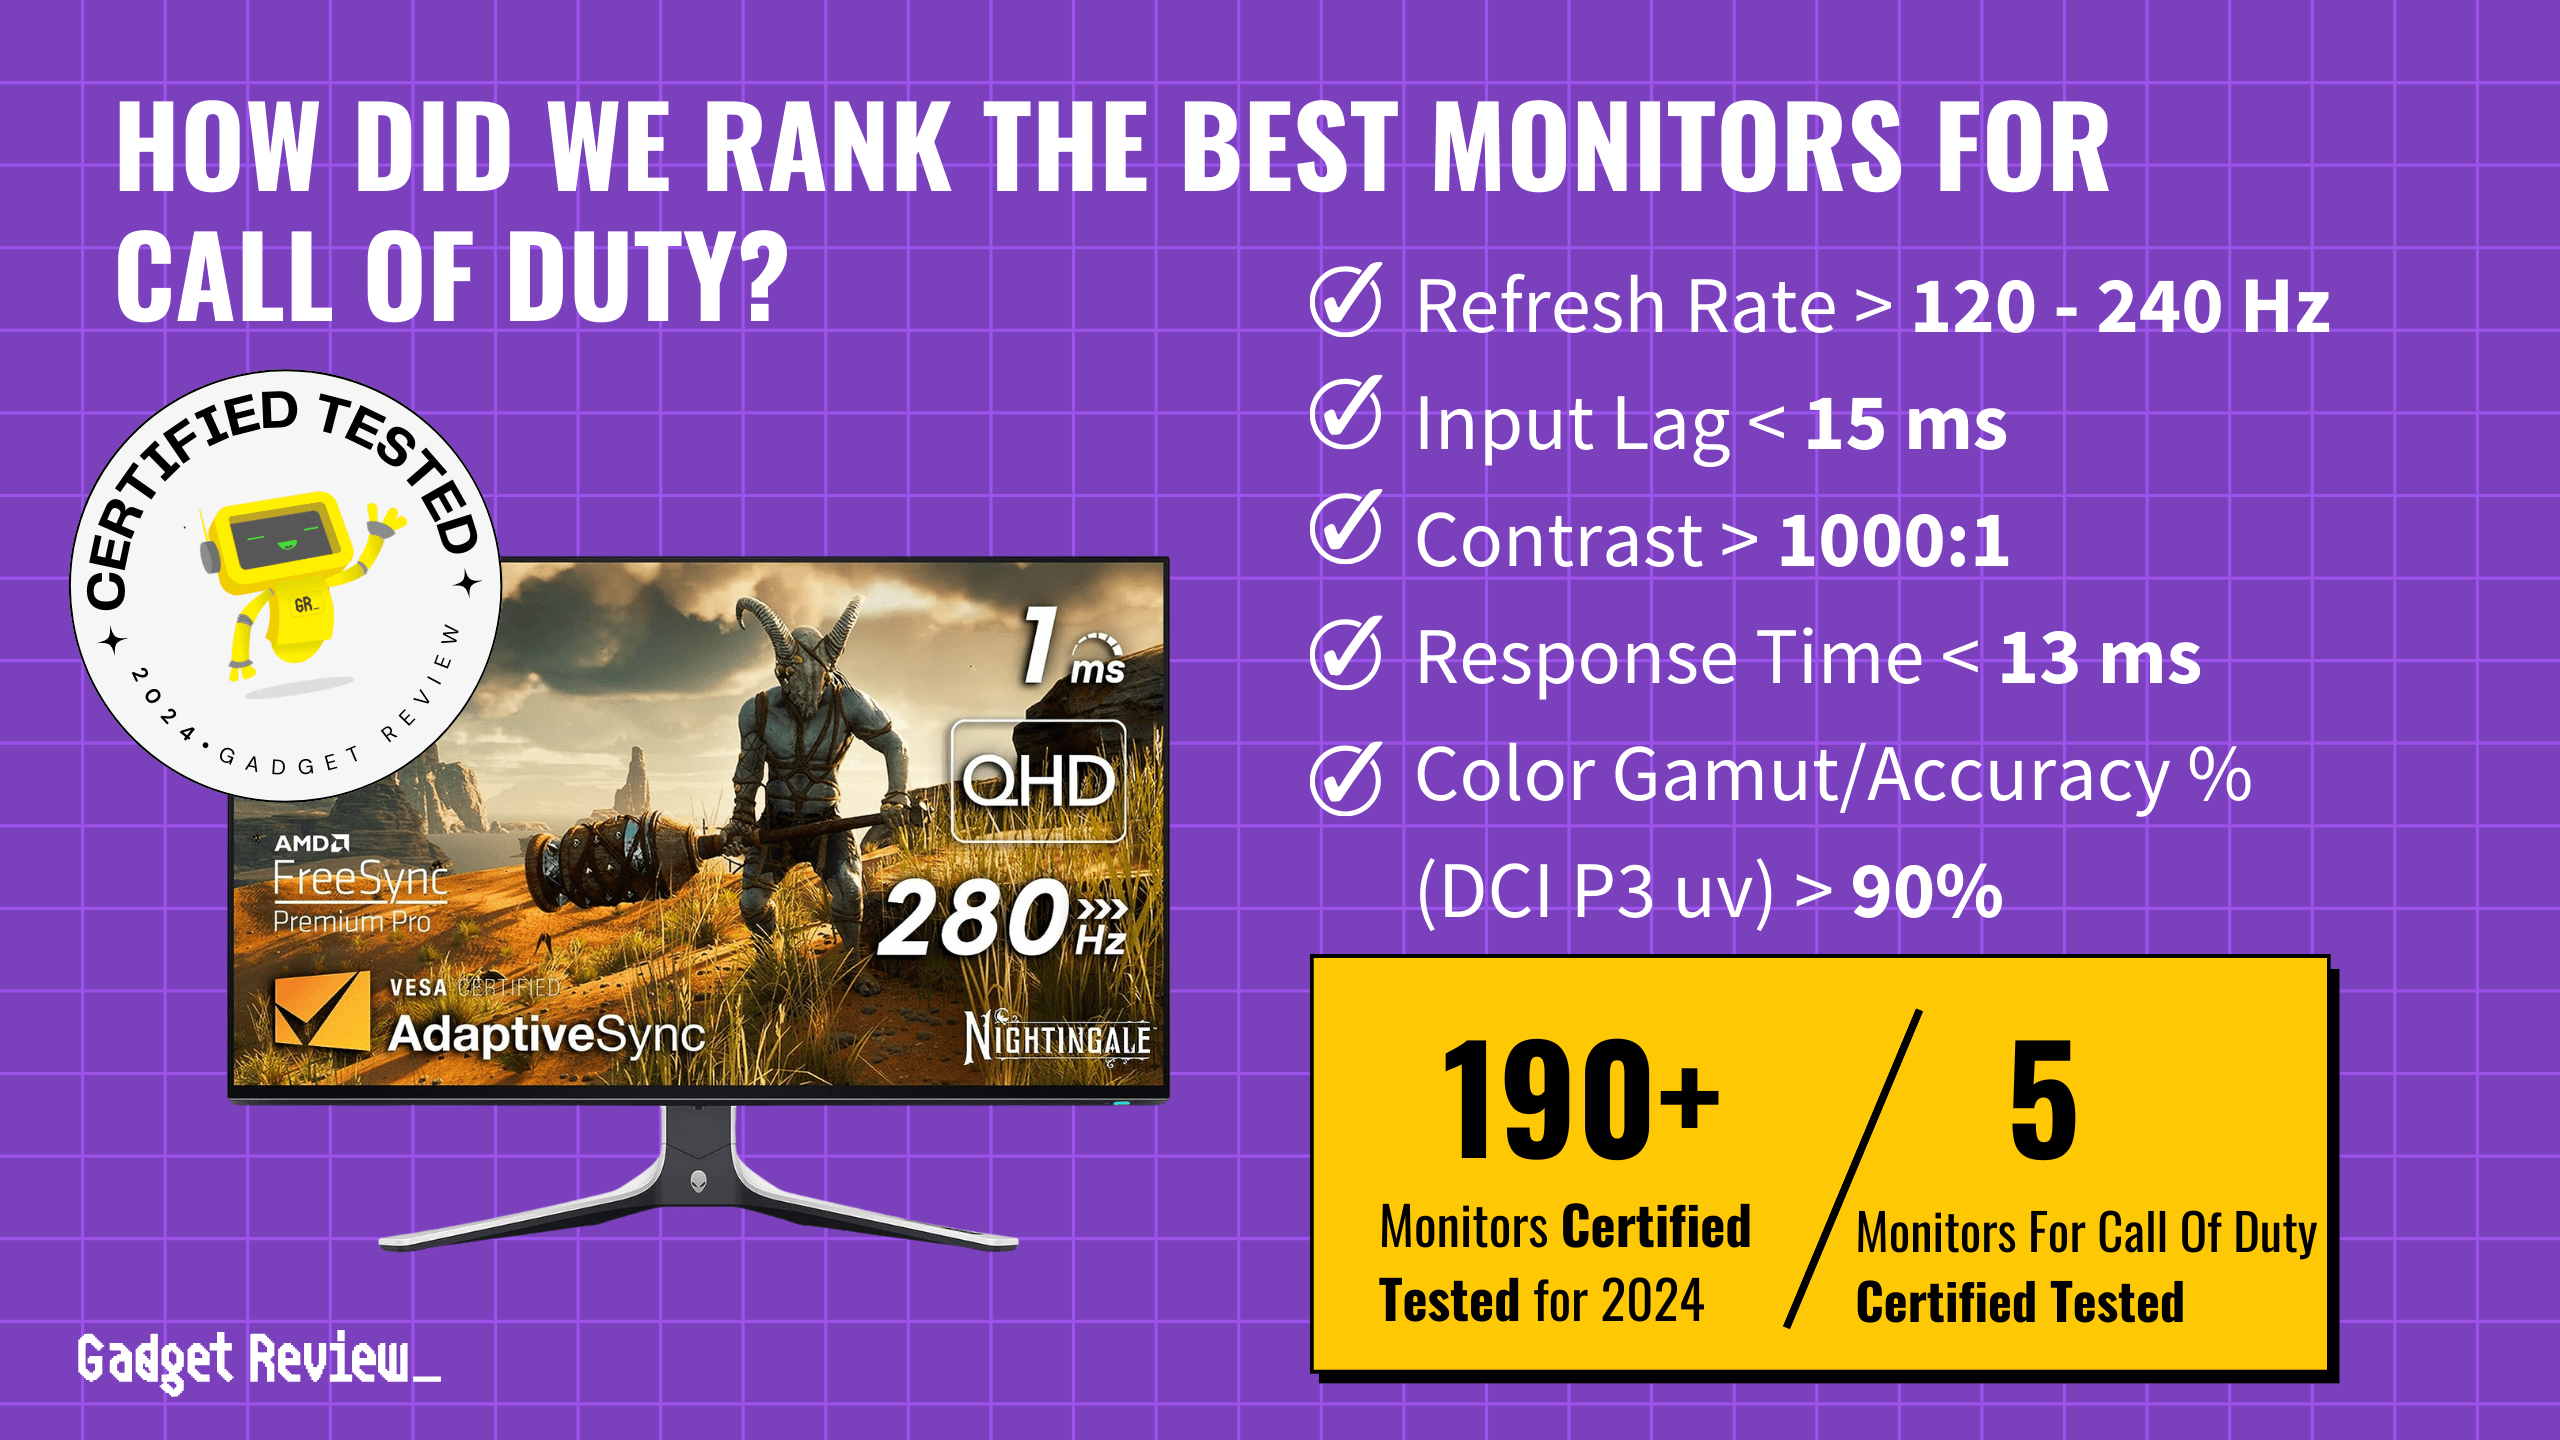 What are the 5 Best Monitors for Call of Duty?